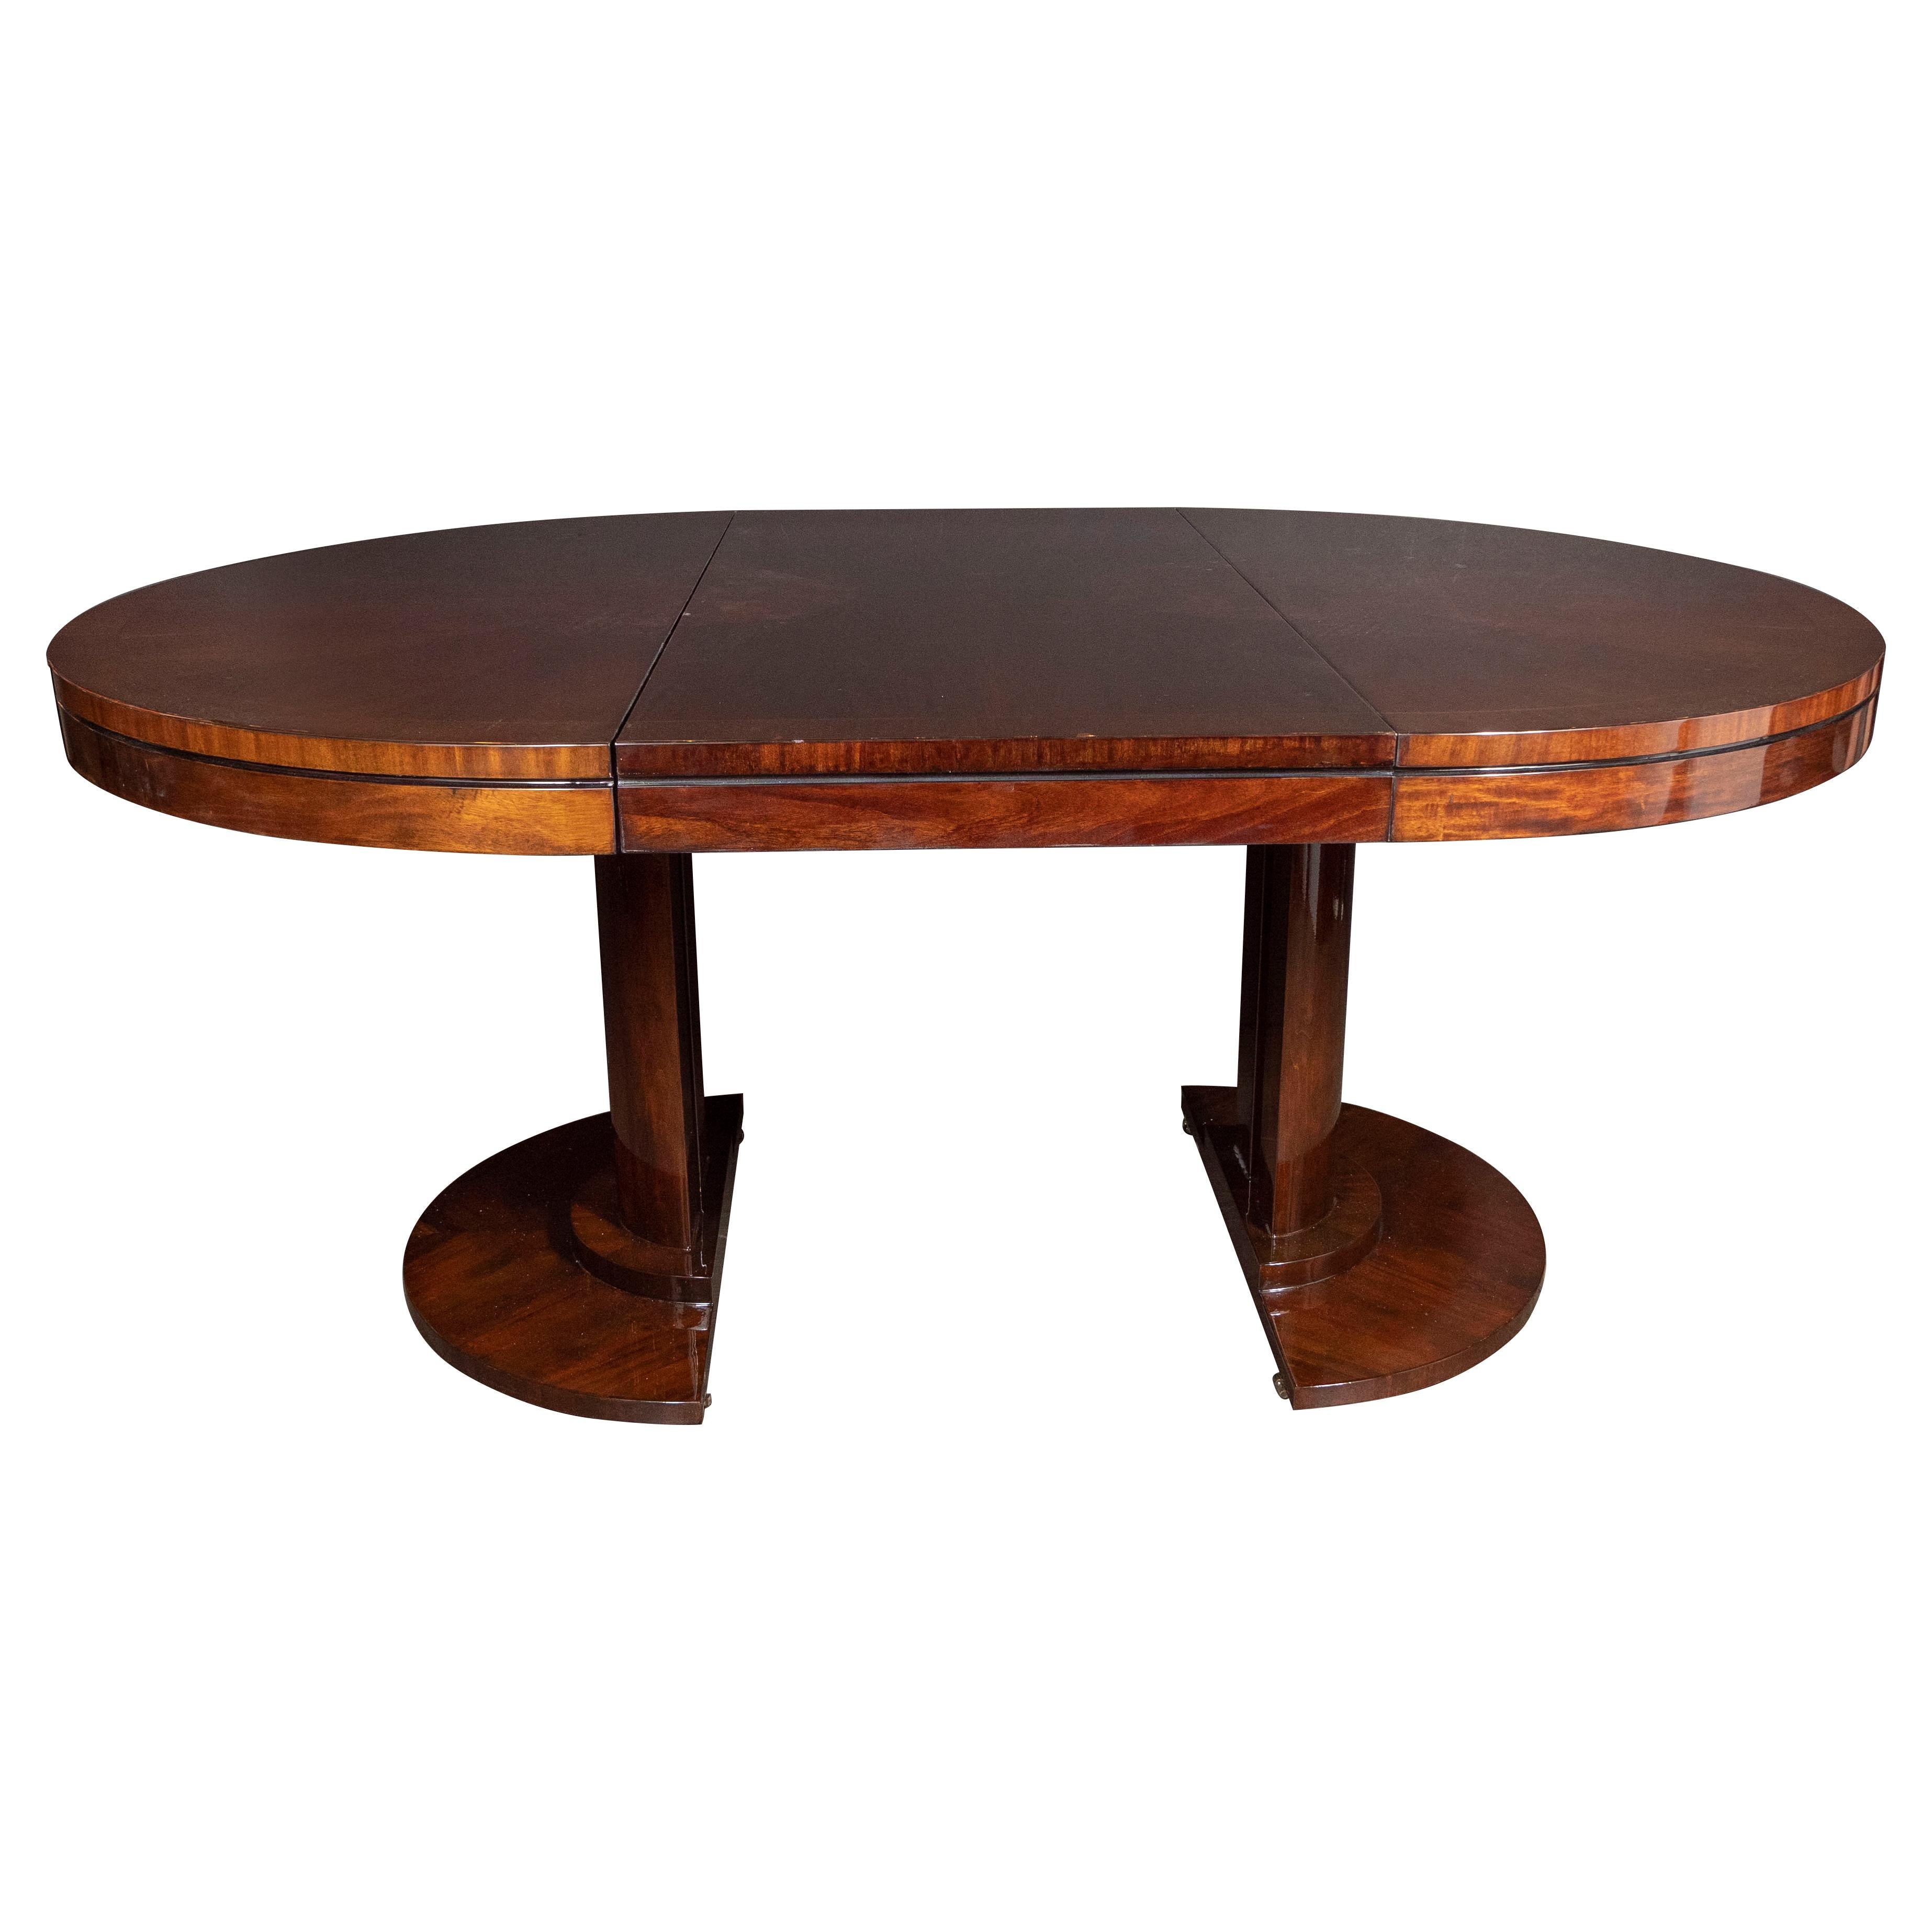 Art Deco Streamlined Bookmatched & Burled Walnut Dining/Center Table 1